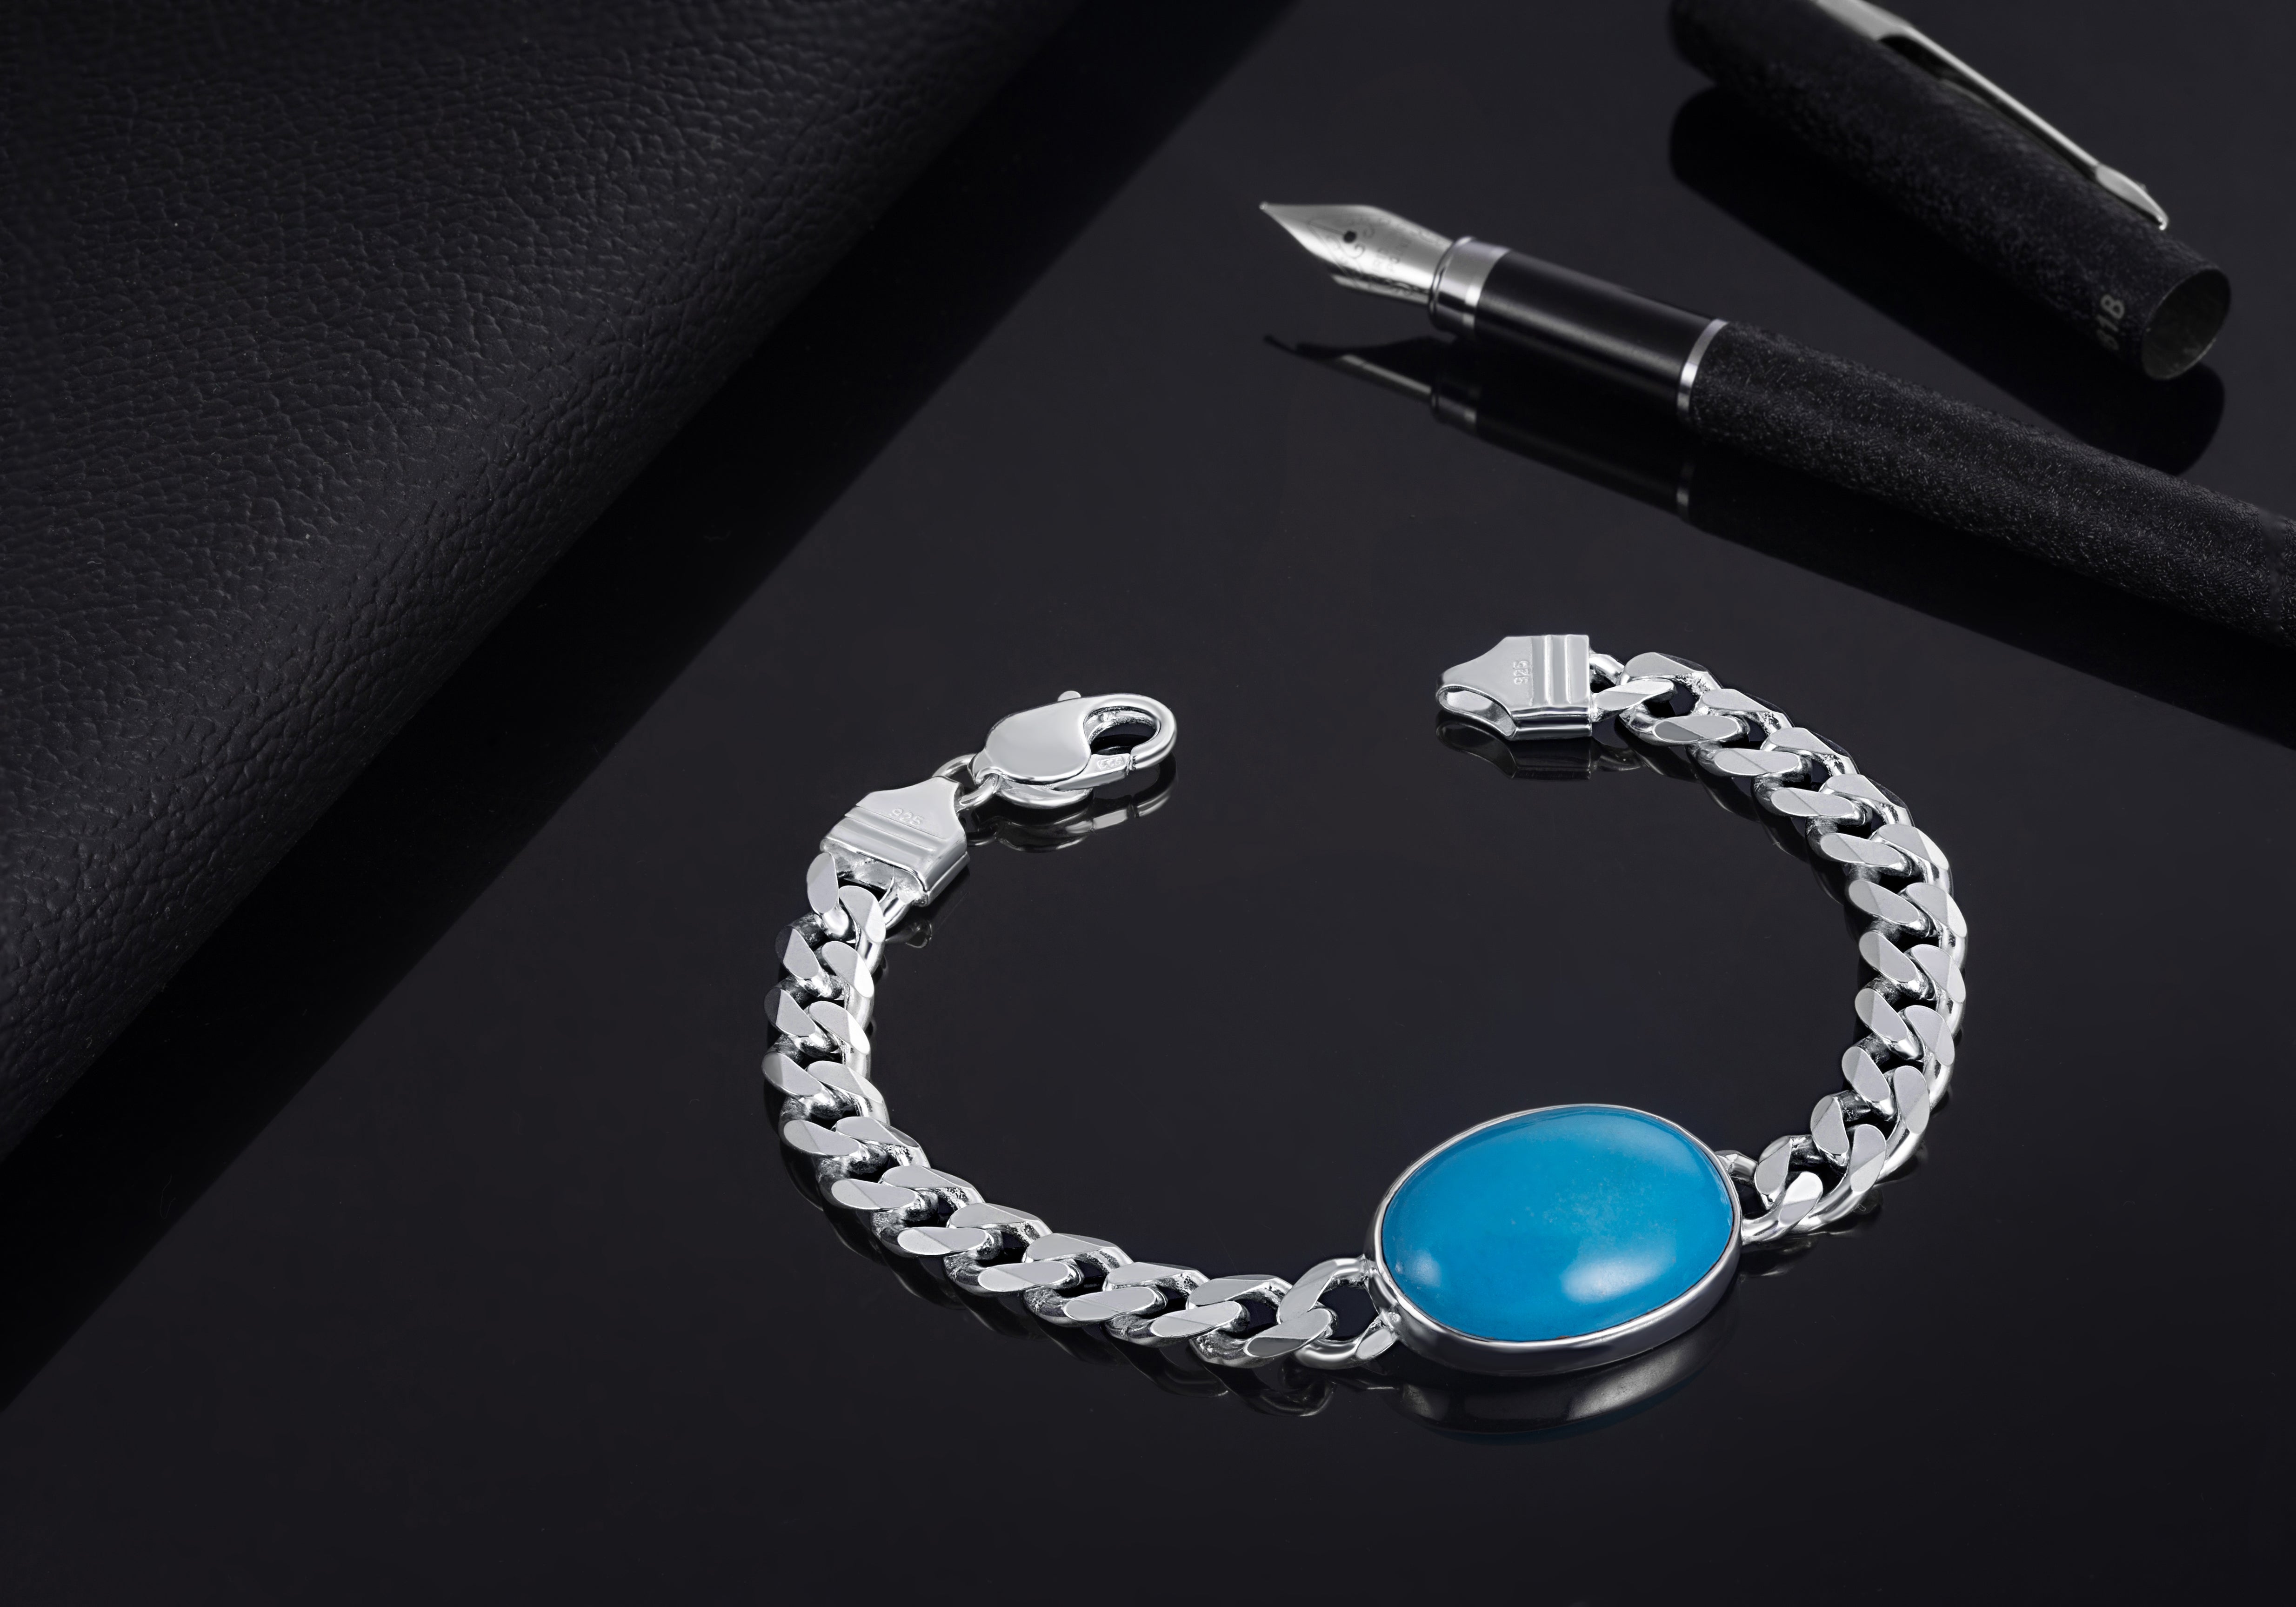 92.5 sterling silver chain bracelet for men and boys with turquoise stone dial also known as salman bracelet